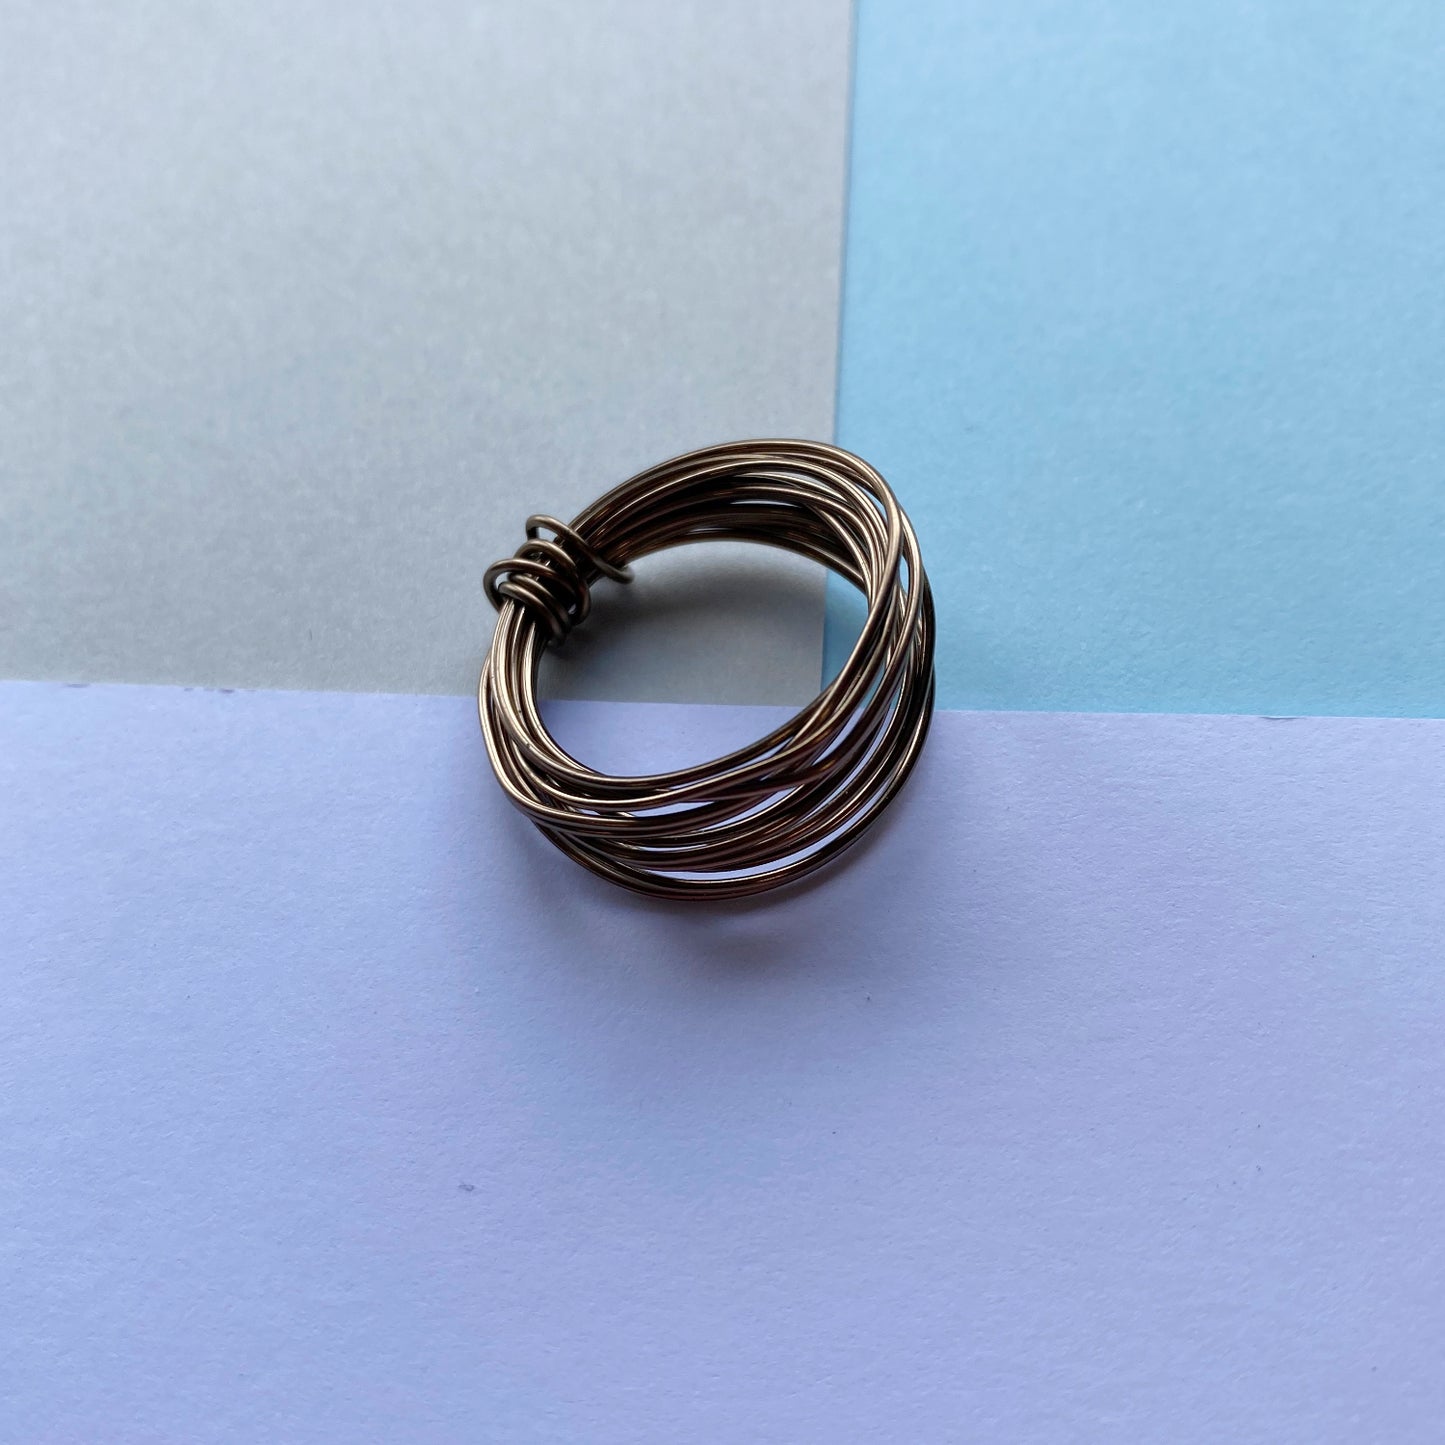 Wire Wrap Rings - silver/neutrals - large (q-w) - The Argentum Design Co